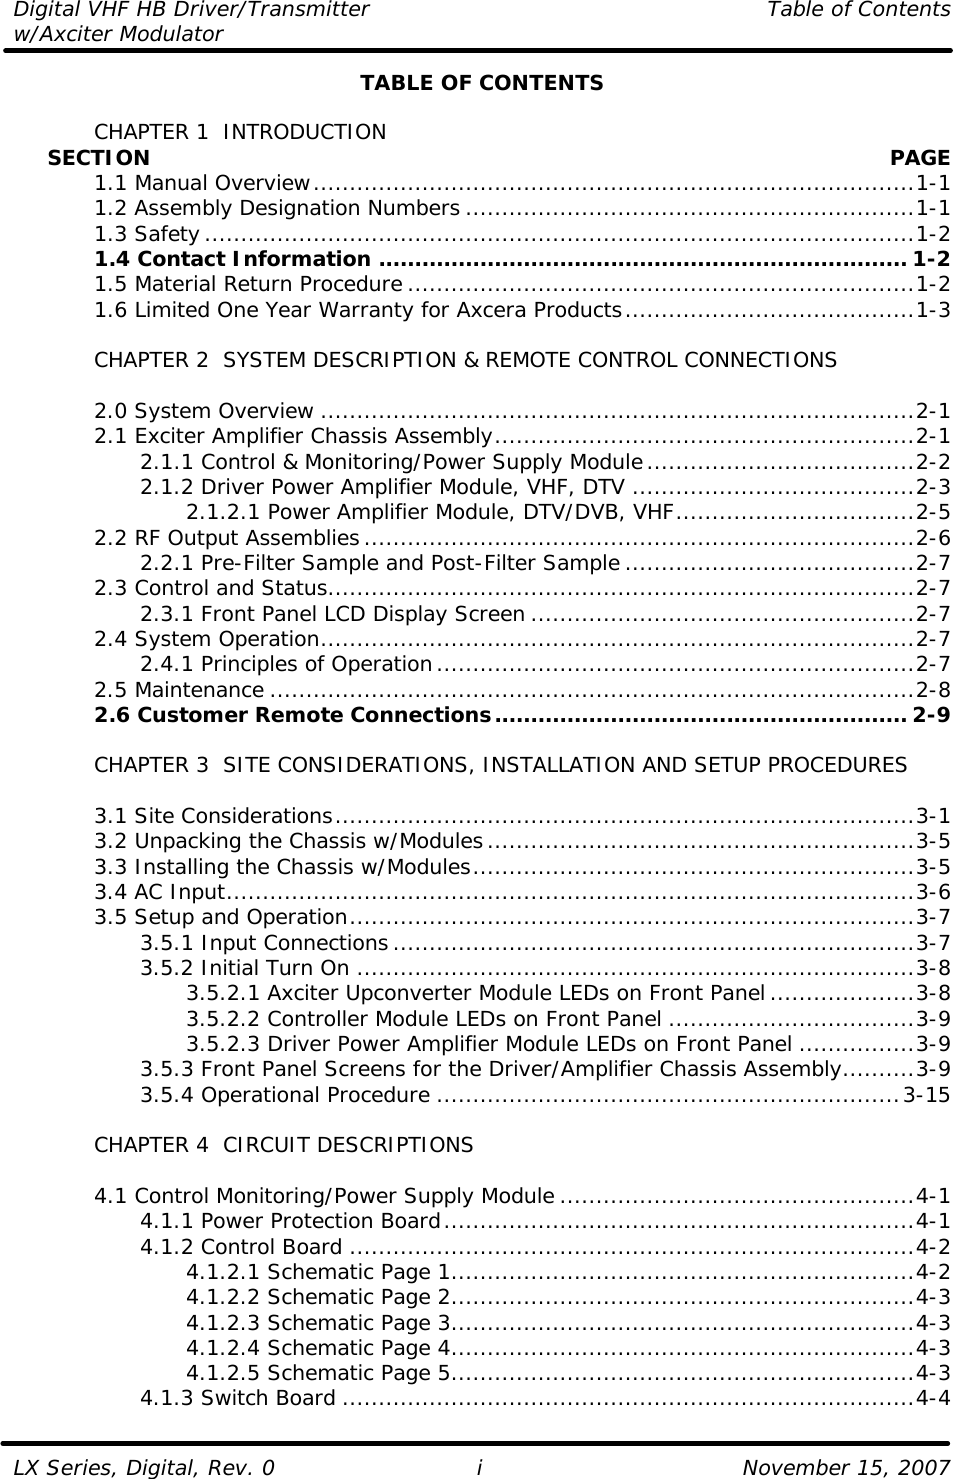 Digital VHF HB Driver/Transmitter    Table of Contents w/Axciter Modulator  LX Series, Digital, Rev. 0    November 15, 2007 i TABLE OF CONTENTS   CHAPTER 1  INTRODUCTION      SECTION    PAGE  1.1 Manual Overview...................................................................................1-1  1.2 Assembly Designation Numbers ..............................................................1-1  1.3 Safety..................................................................................................1-2  1.4 Contact Information ......................................................................... 1-2  1.5 Material Return Procedure ......................................................................1-2  1.6 Limited One Year Warranty for Axcera Products........................................1-3   CHAPTER 2  SYSTEM DESCRIPTION &amp; REMOTE CONTROL CONNECTIONS   2.0 System Overview ..................................................................................2-1  2.1 Exciter Amplifier Chassis Assembly..........................................................2-1     2.1.1 Control &amp; Monitoring/Power Supply Module.....................................2-2     2.1.2 Driver Power Amplifier Module, VHF, DTV .......................................2-3     2.1.2.1 Power Amplifier Module, DTV/DVB, VHF.................................2-5  2.2 RF Output Assemblies............................................................................2-6     2.2.1 Pre-Filter Sample and Post-Filter Sample ........................................2-7  2.3 Control and Status.................................................................................2-7     2.3.1 Front Panel LCD Display Screen .....................................................2-7  2.4 System Operation..................................................................................2-7     2.4.1 Principles of Operation..................................................................2-7  2.5 Maintenance .........................................................................................2-8  2.6 Customer Remote Connections......................................................... 2-9       CHAPTER 3  SITE CONSIDERATIONS, INSTALLATION AND SETUP PROCEDURES     3.1 Site Considerations................................................................................3-1  3.2 Unpacking the Chassis w/Modules...........................................................3-5  3.3 Installing the Chassis w/Modules.............................................................3-5  3.4 AC Input...............................................................................................3-6  3.5 Setup and Operation..............................................................................3-7     3.5.1 Input Connections........................................................................3-7     3.5.2 Initial Turn On .............................................................................3-8     3.5.2.1 Axciter Upconverter Module LEDs on Front Panel....................3-8     3.5.2.2 Controller Module LEDs on Front Panel ..................................3-9     3.5.2.3 Driver Power Amplifier Module LEDs on Front Panel ................3-9     3.5.3 Front Panel Screens for the Driver/Amplifier Chassis Assembly..........3-9     3.5.4 Operational Procedure ................................................................3-15   CHAPTER 4  CIRCUIT DESCRIPTIONS   4.1 Control Monitoring/Power Supply Module .................................................4-1     4.1.1 Power Protection Board.................................................................4-1     4.1.2 Control Board ..............................................................................4-2     4.1.2.1 Schematic Page 1................................................................4-2     4.1.2.2 Schematic Page 2................................................................4-3     4.1.2.3 Schematic Page 3................................................................4-3     4.1.2.4 Schematic Page 4................................................................4-3     4.1.2.5 Schematic Page 5................................................................4-3     4.1.3 Switch Board ...............................................................................4-4 